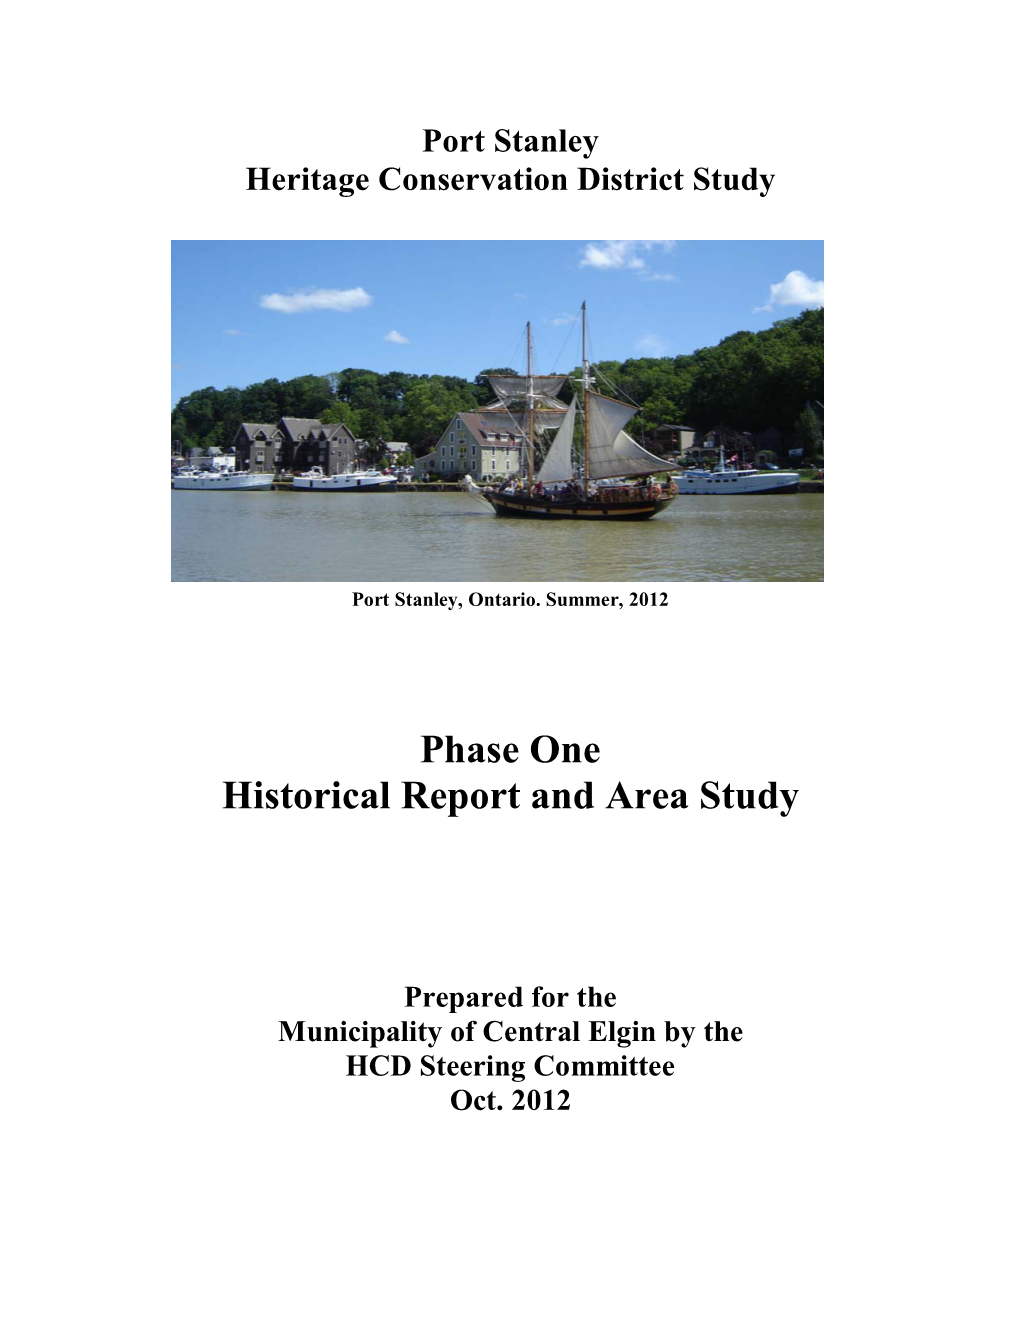 Phase One Historical Report and Area Study